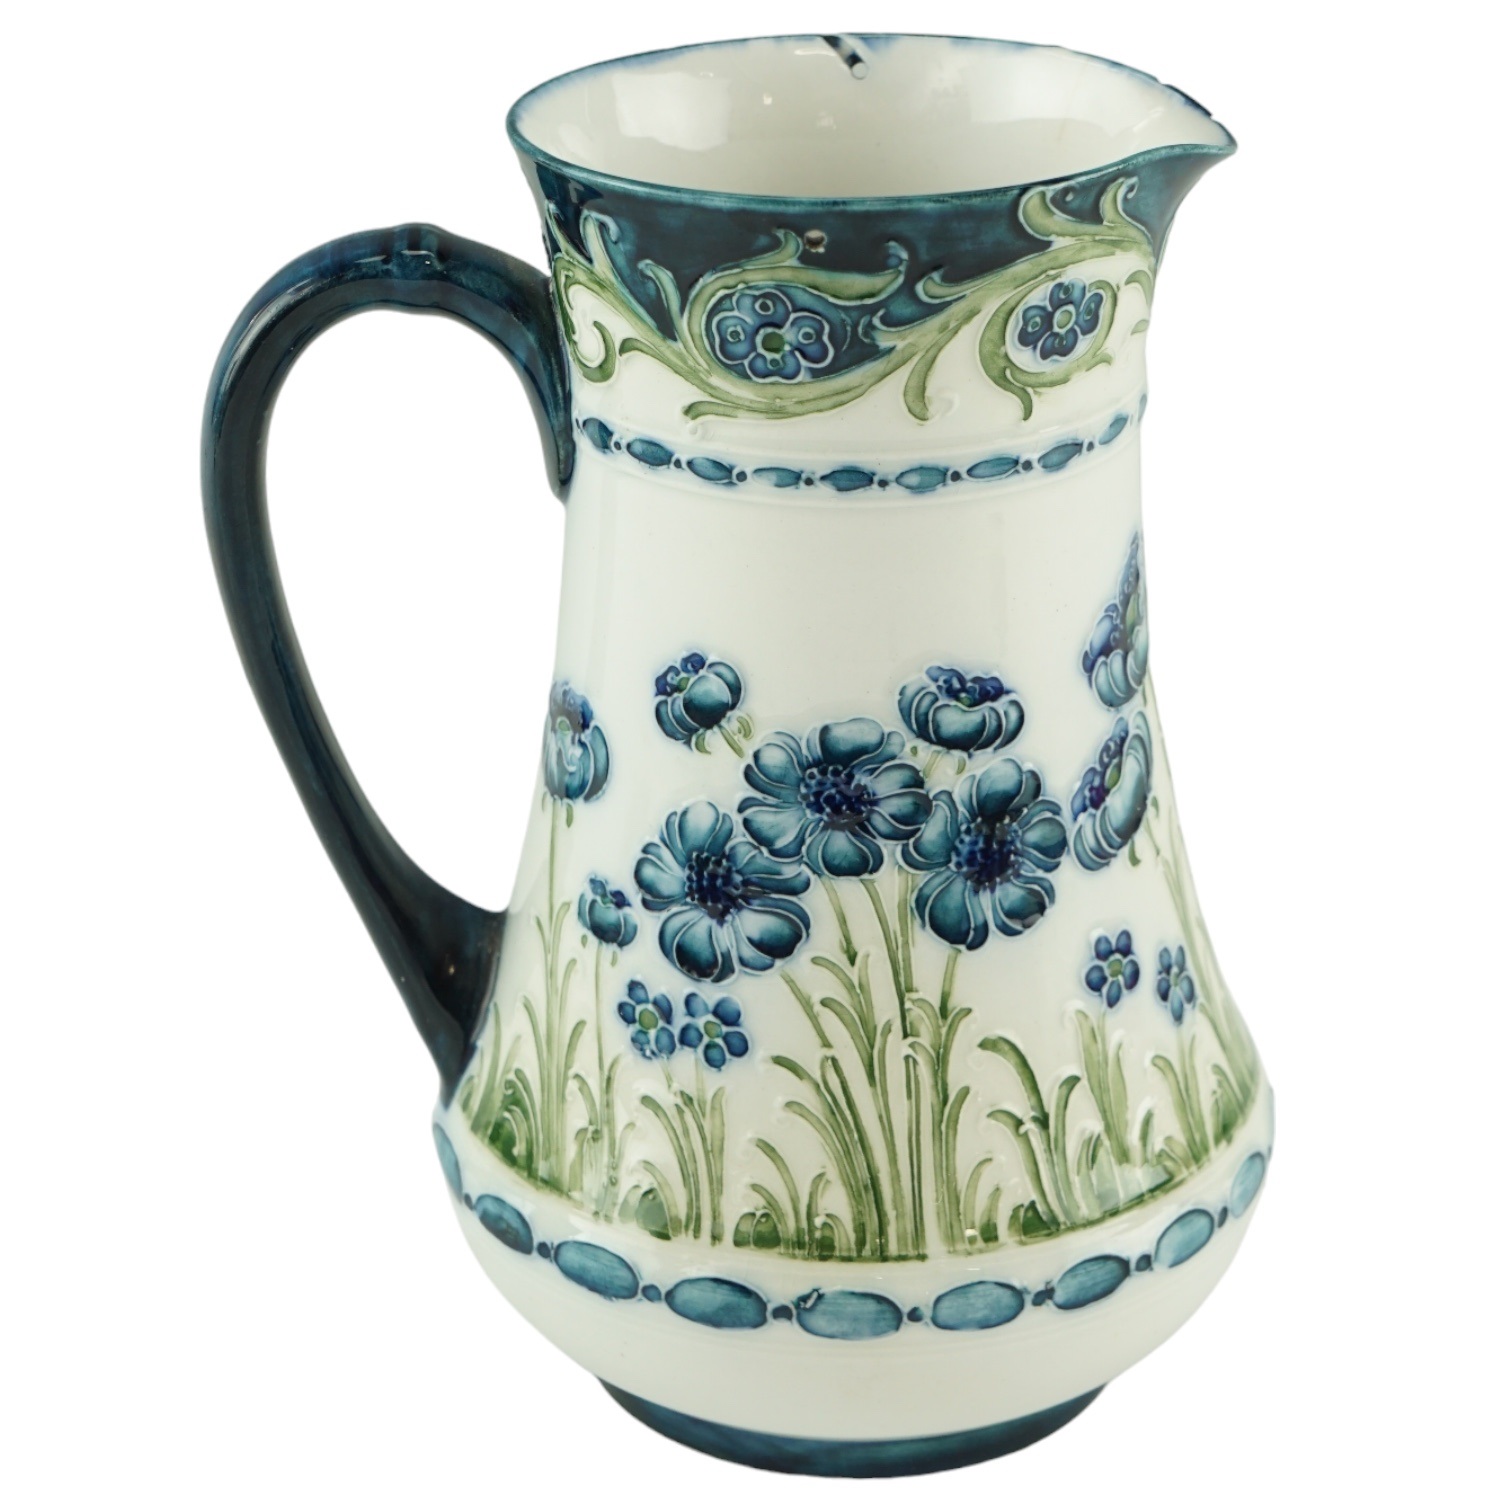 An early 20th Century William Moorcroft / James Macintyre & Co Florian Ware jug, having blue and - Image 4 of 7